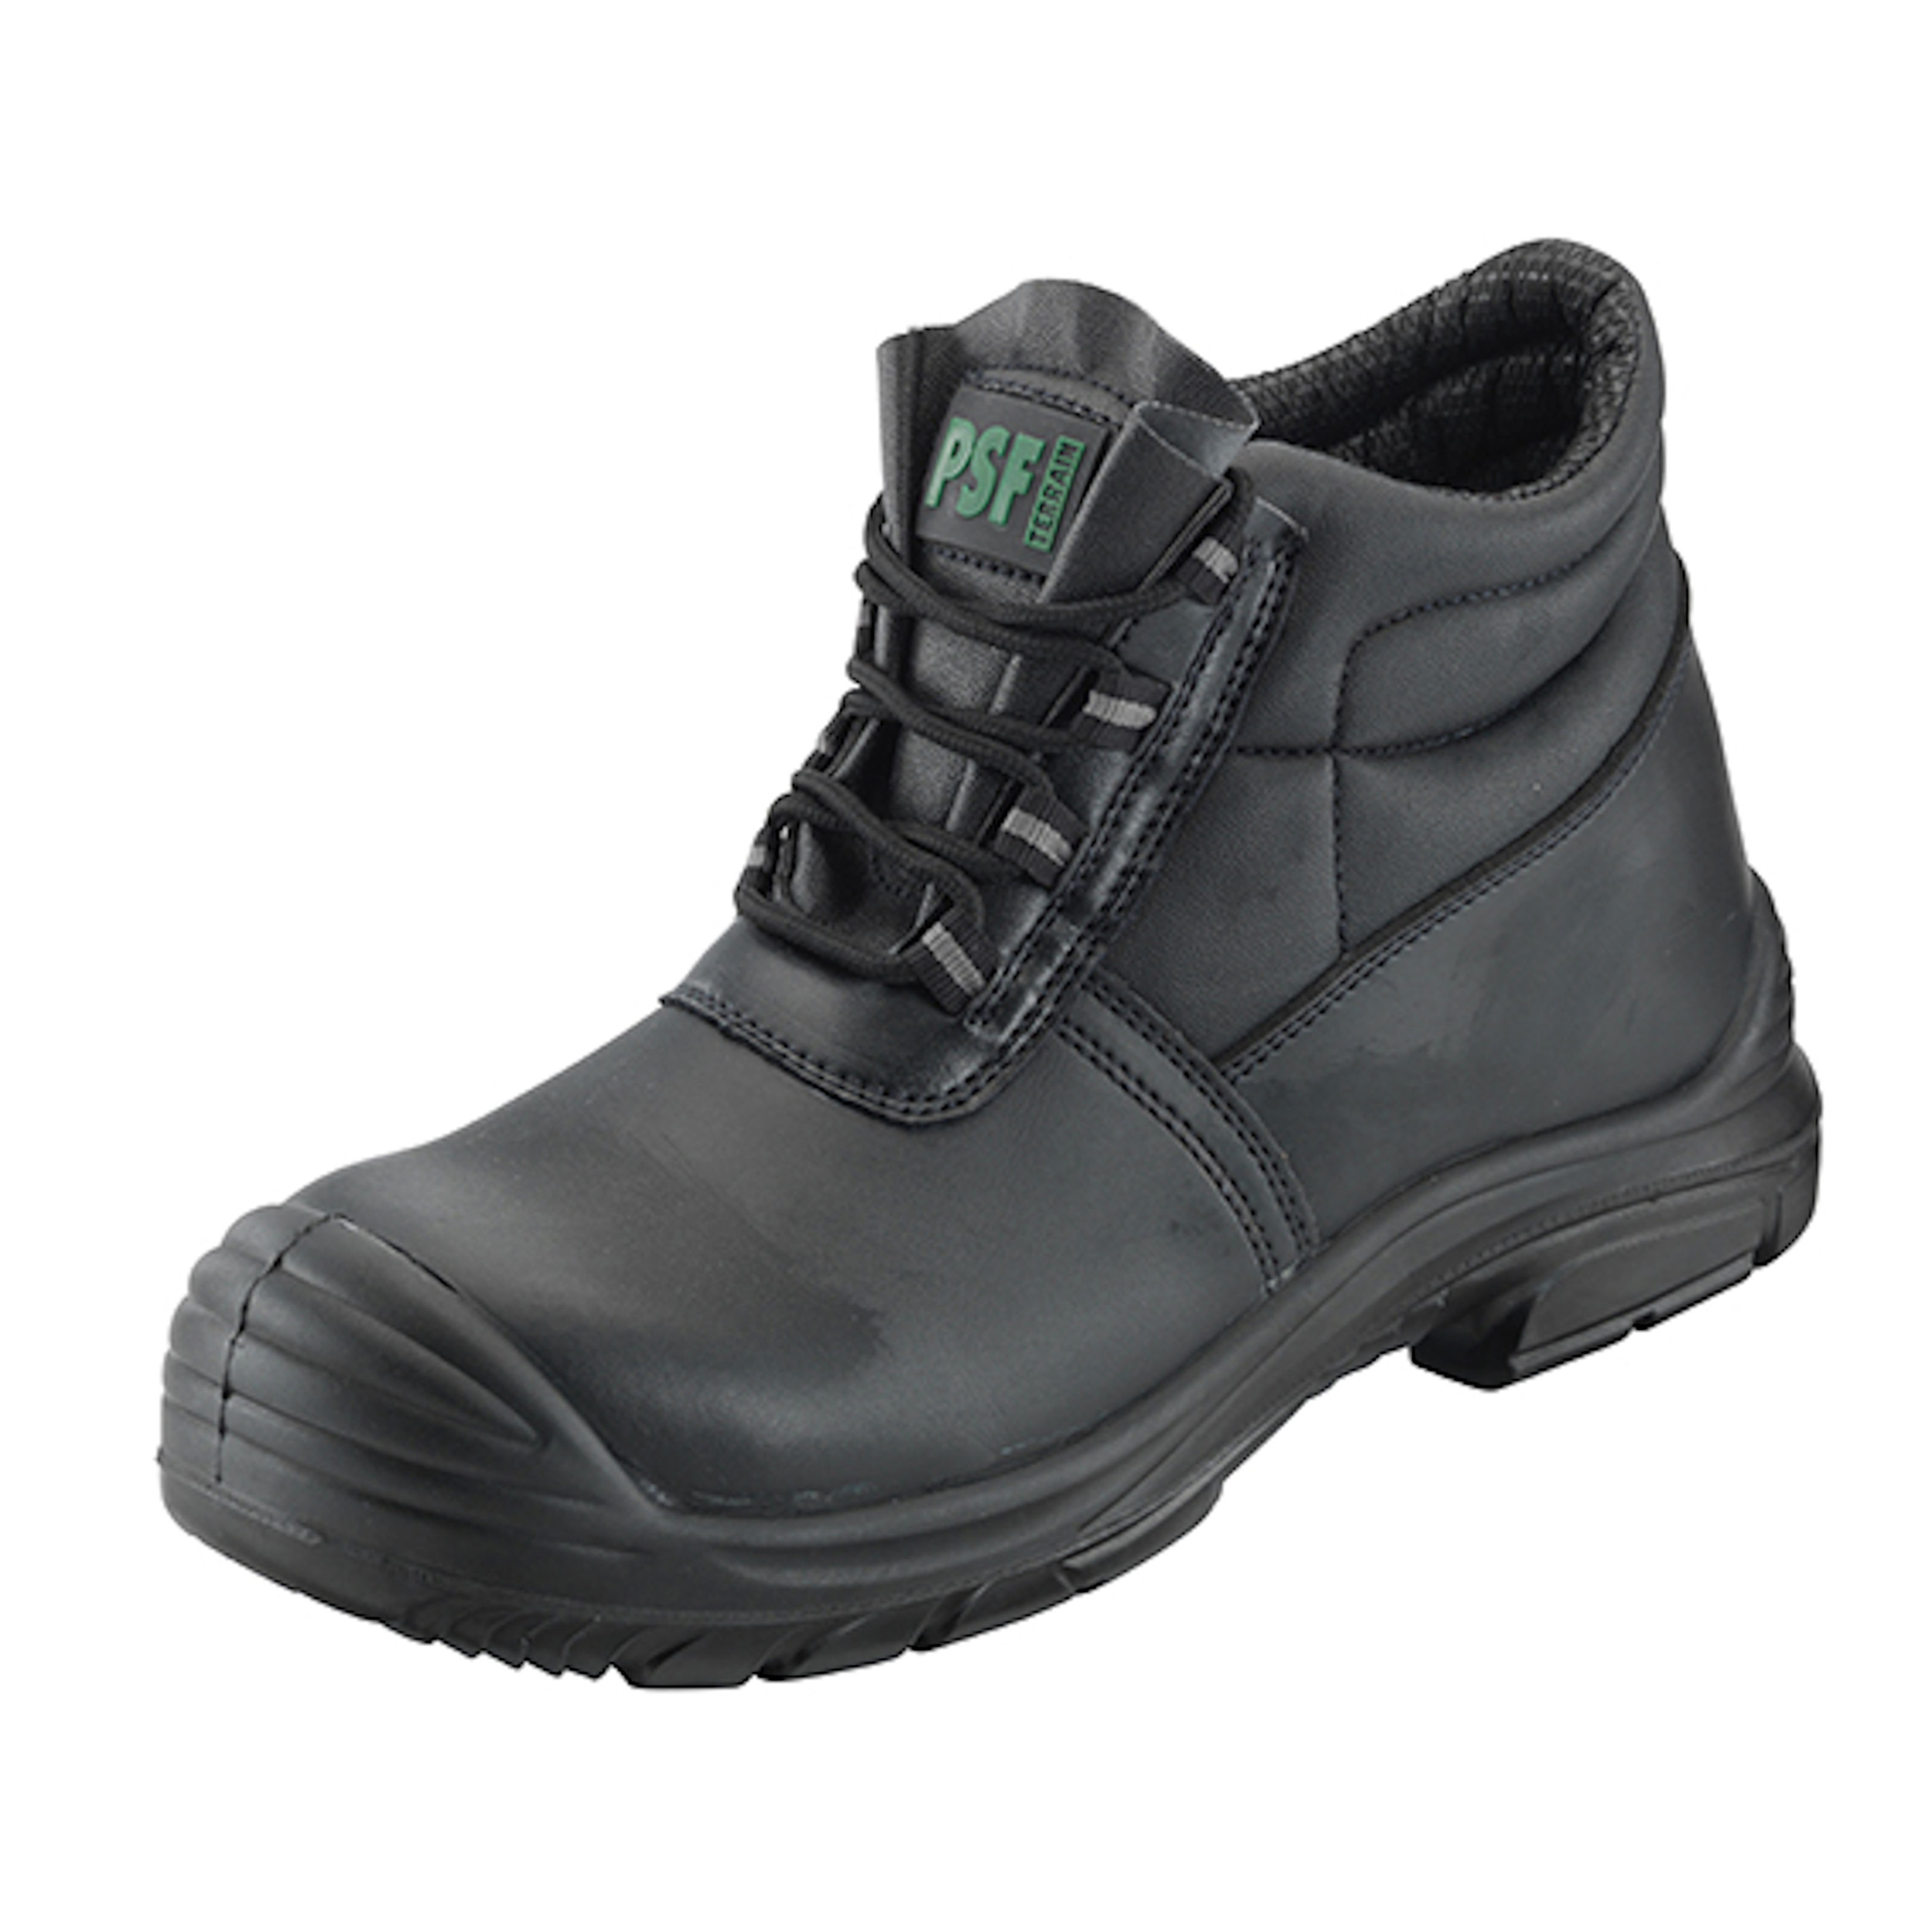 PSF Worktough Black Leather Safety Composite Toe Cap Trainer Work Boots Shoes Sz 